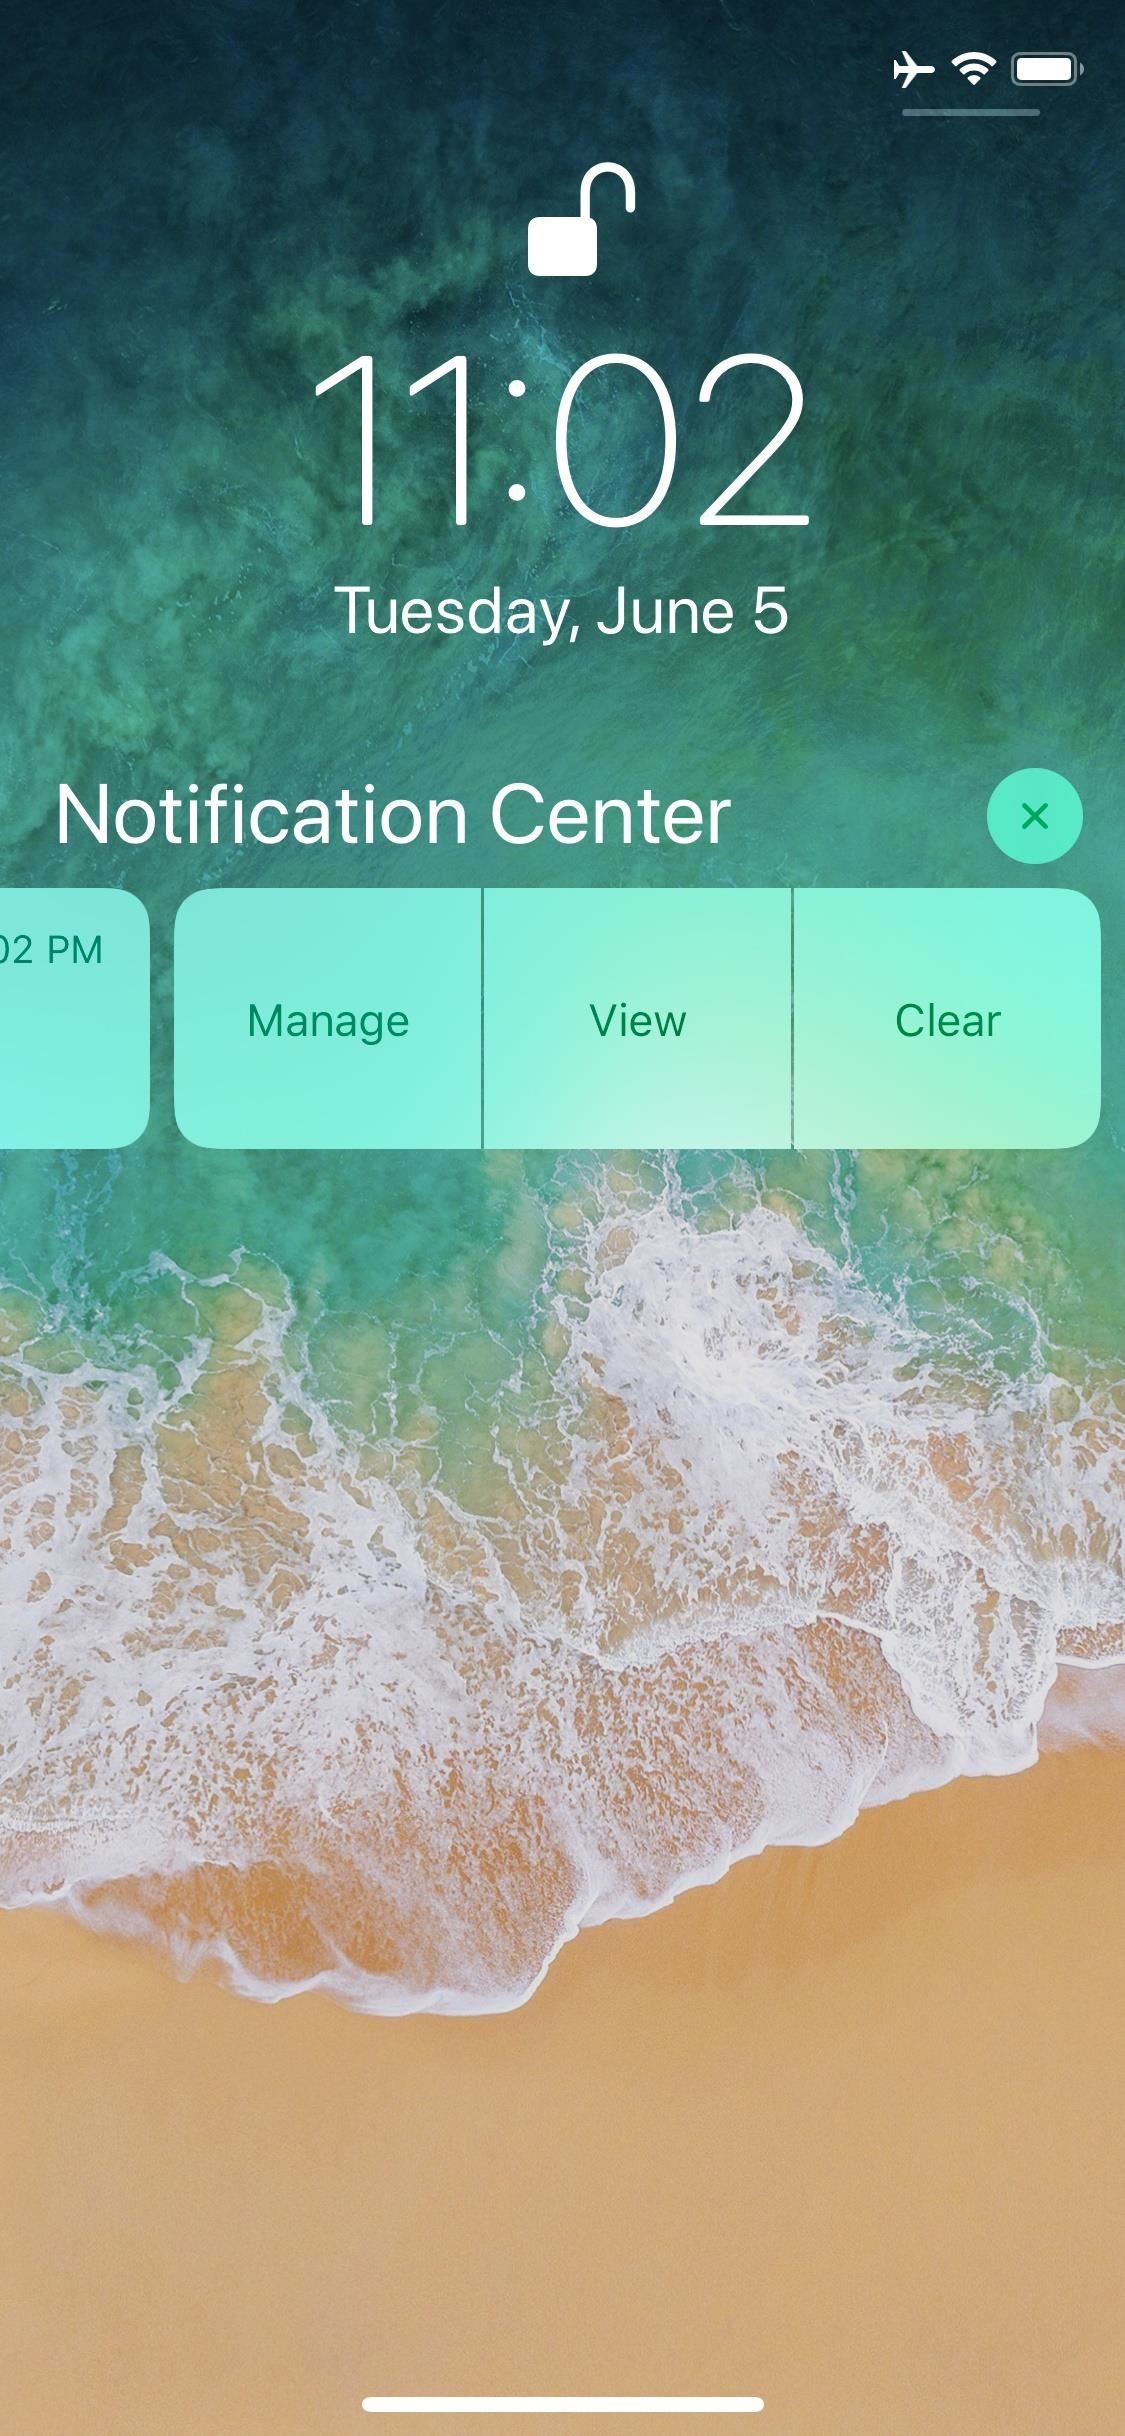 Instant Tuning: How to Quickly Change Notifications Settings for Any App in iOS 12